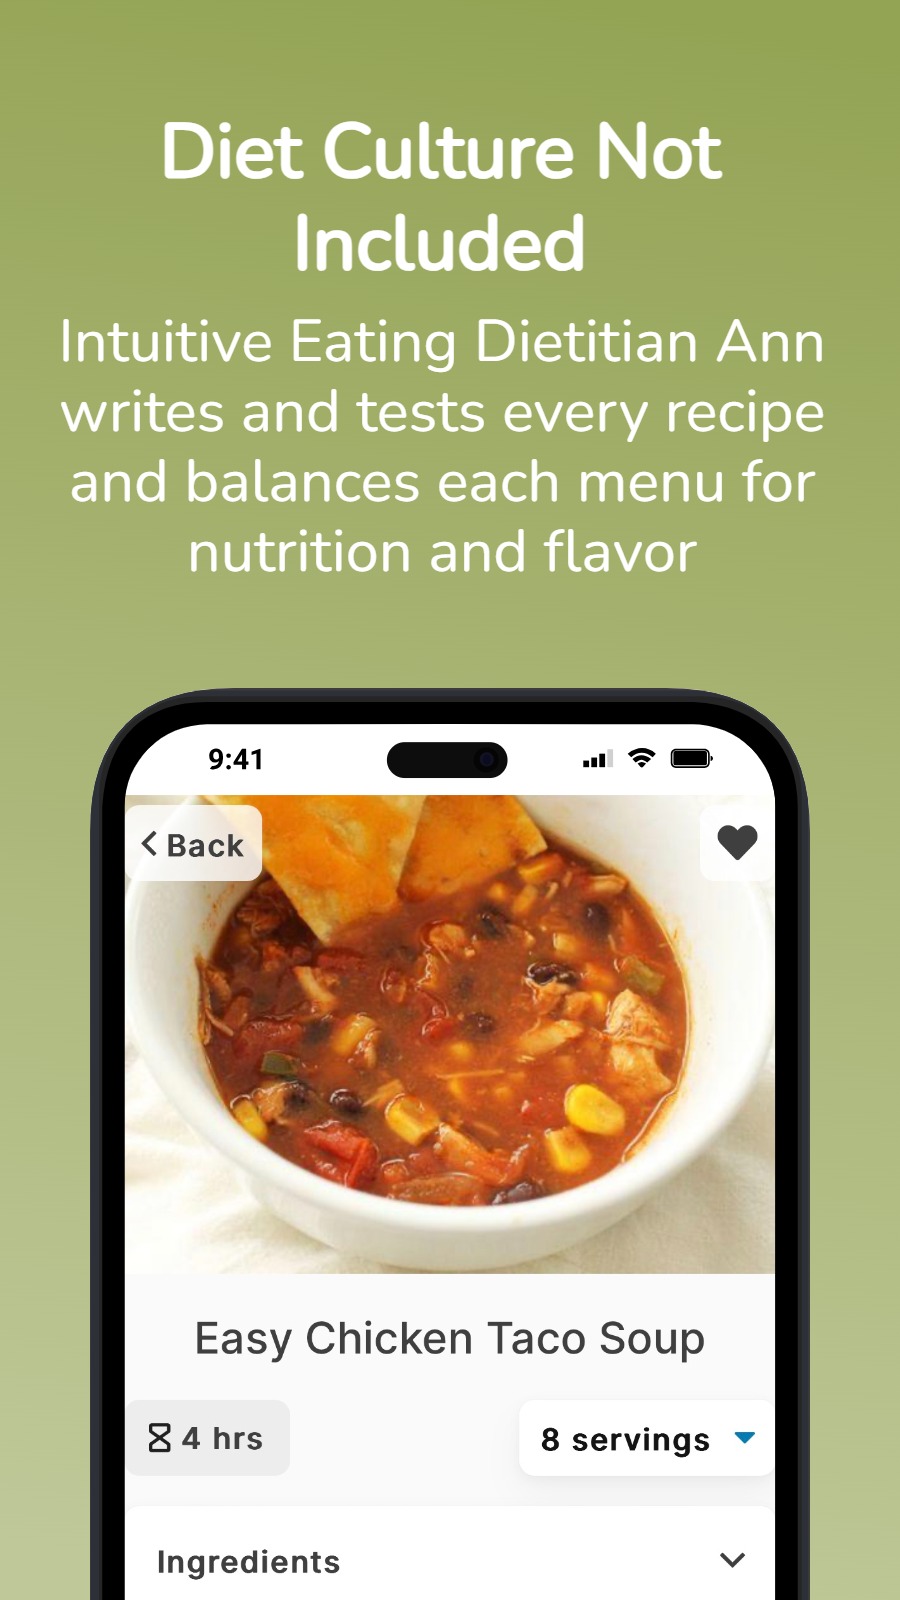 Diet Culture Not Included - Intuitive Eating Dietitian Ann writes and tests every recipe and balances each menu for nutrition and flavor